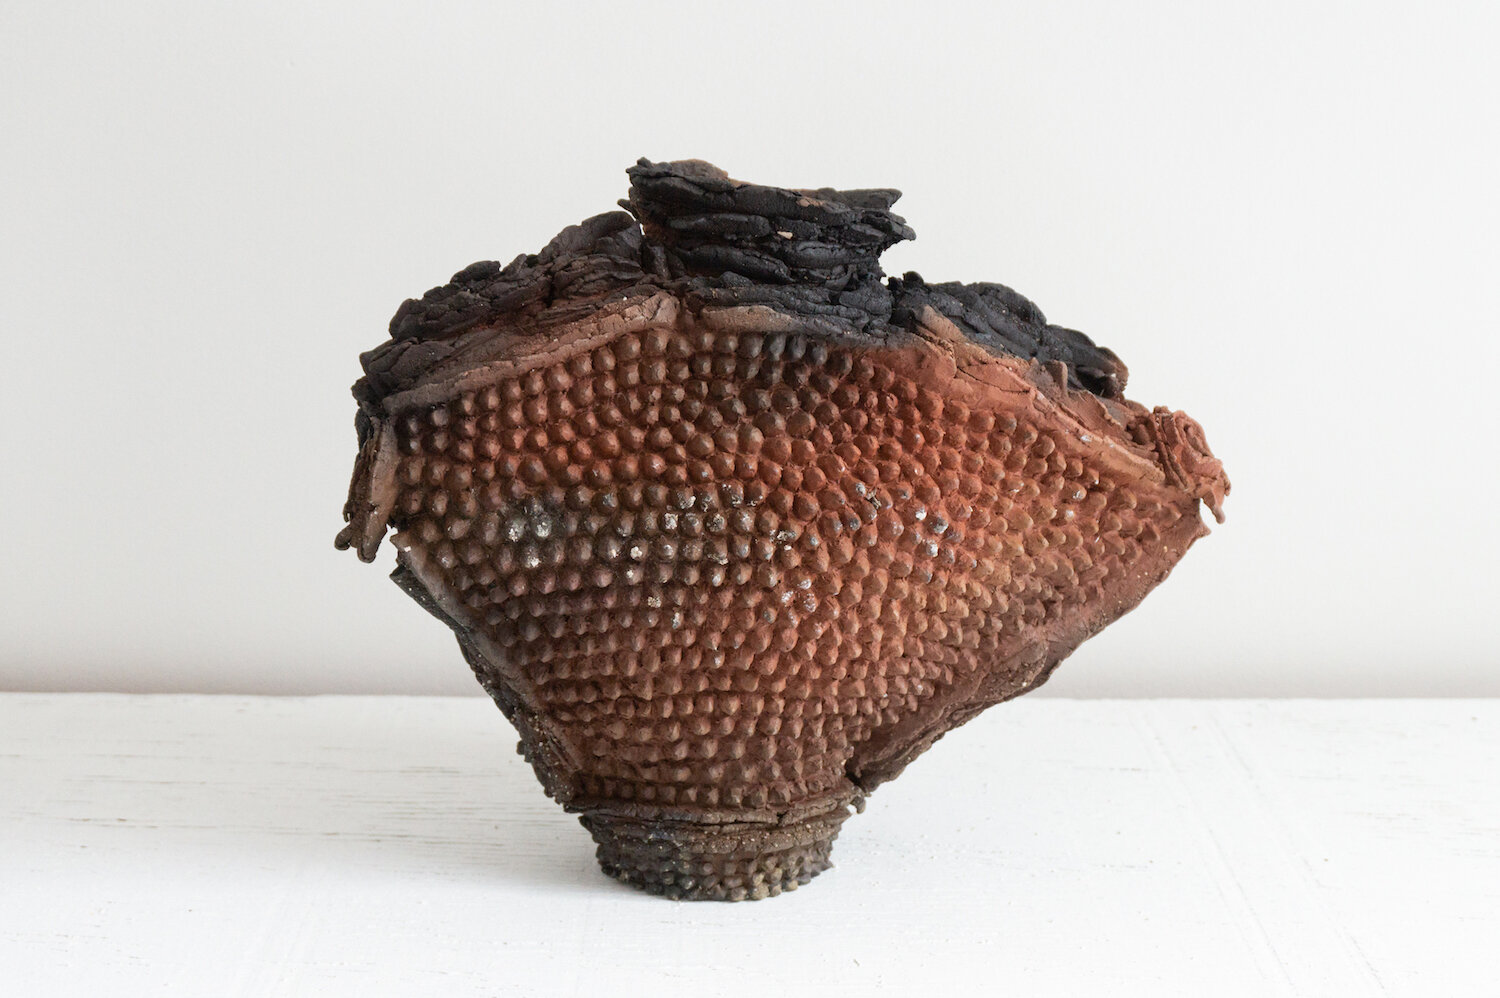  Mom’s Purse, 2021, pit fired earthenware, 11” x 5” x 8.5” 